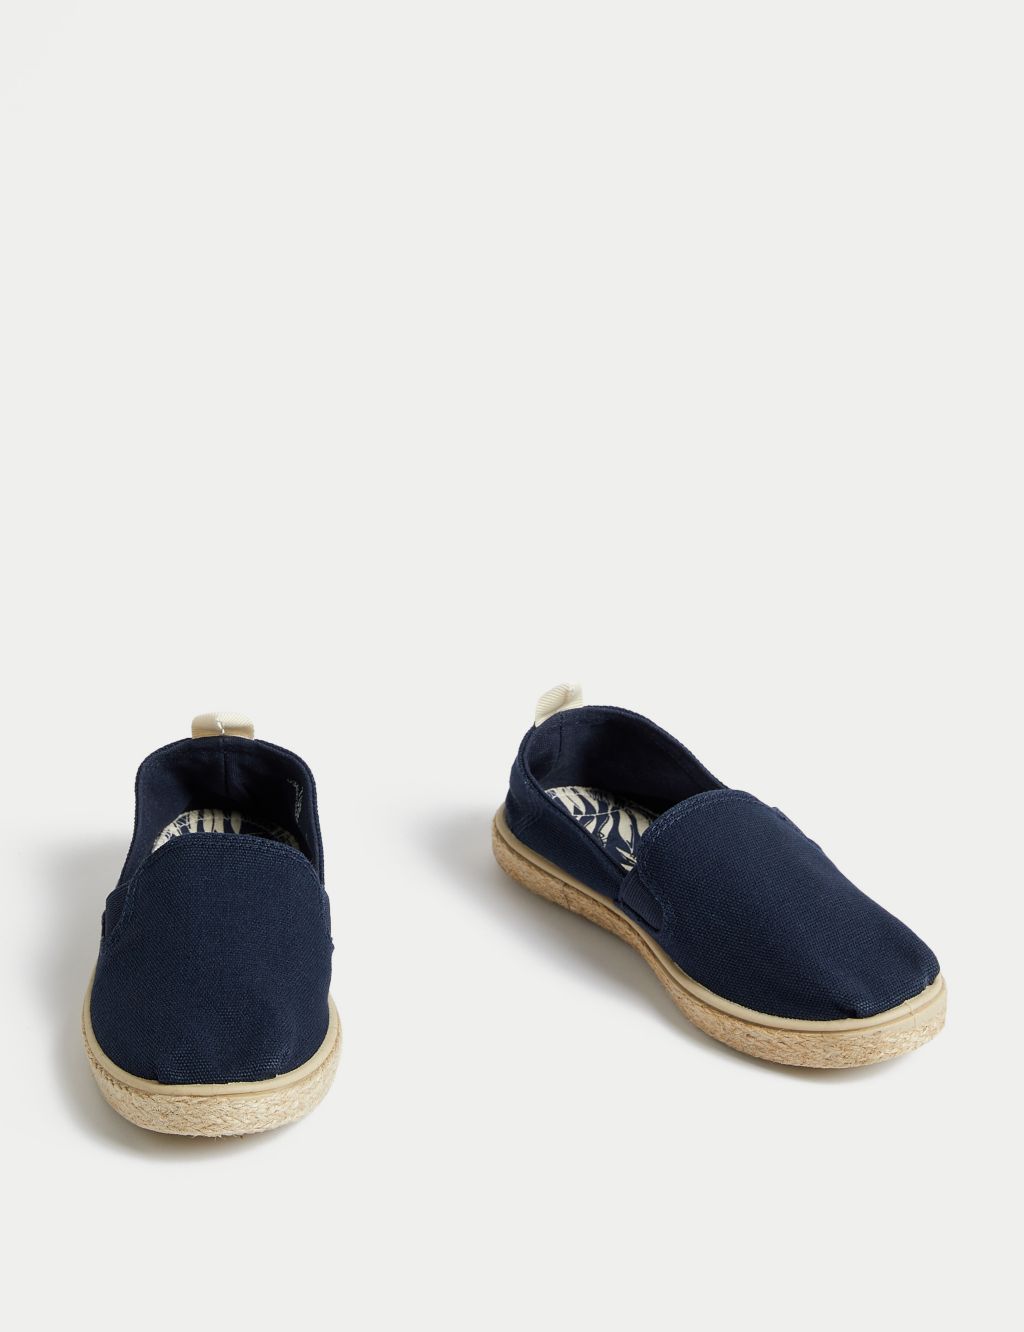 Kids' Espadrilles (4 Small - 2 Large) 1 of 4